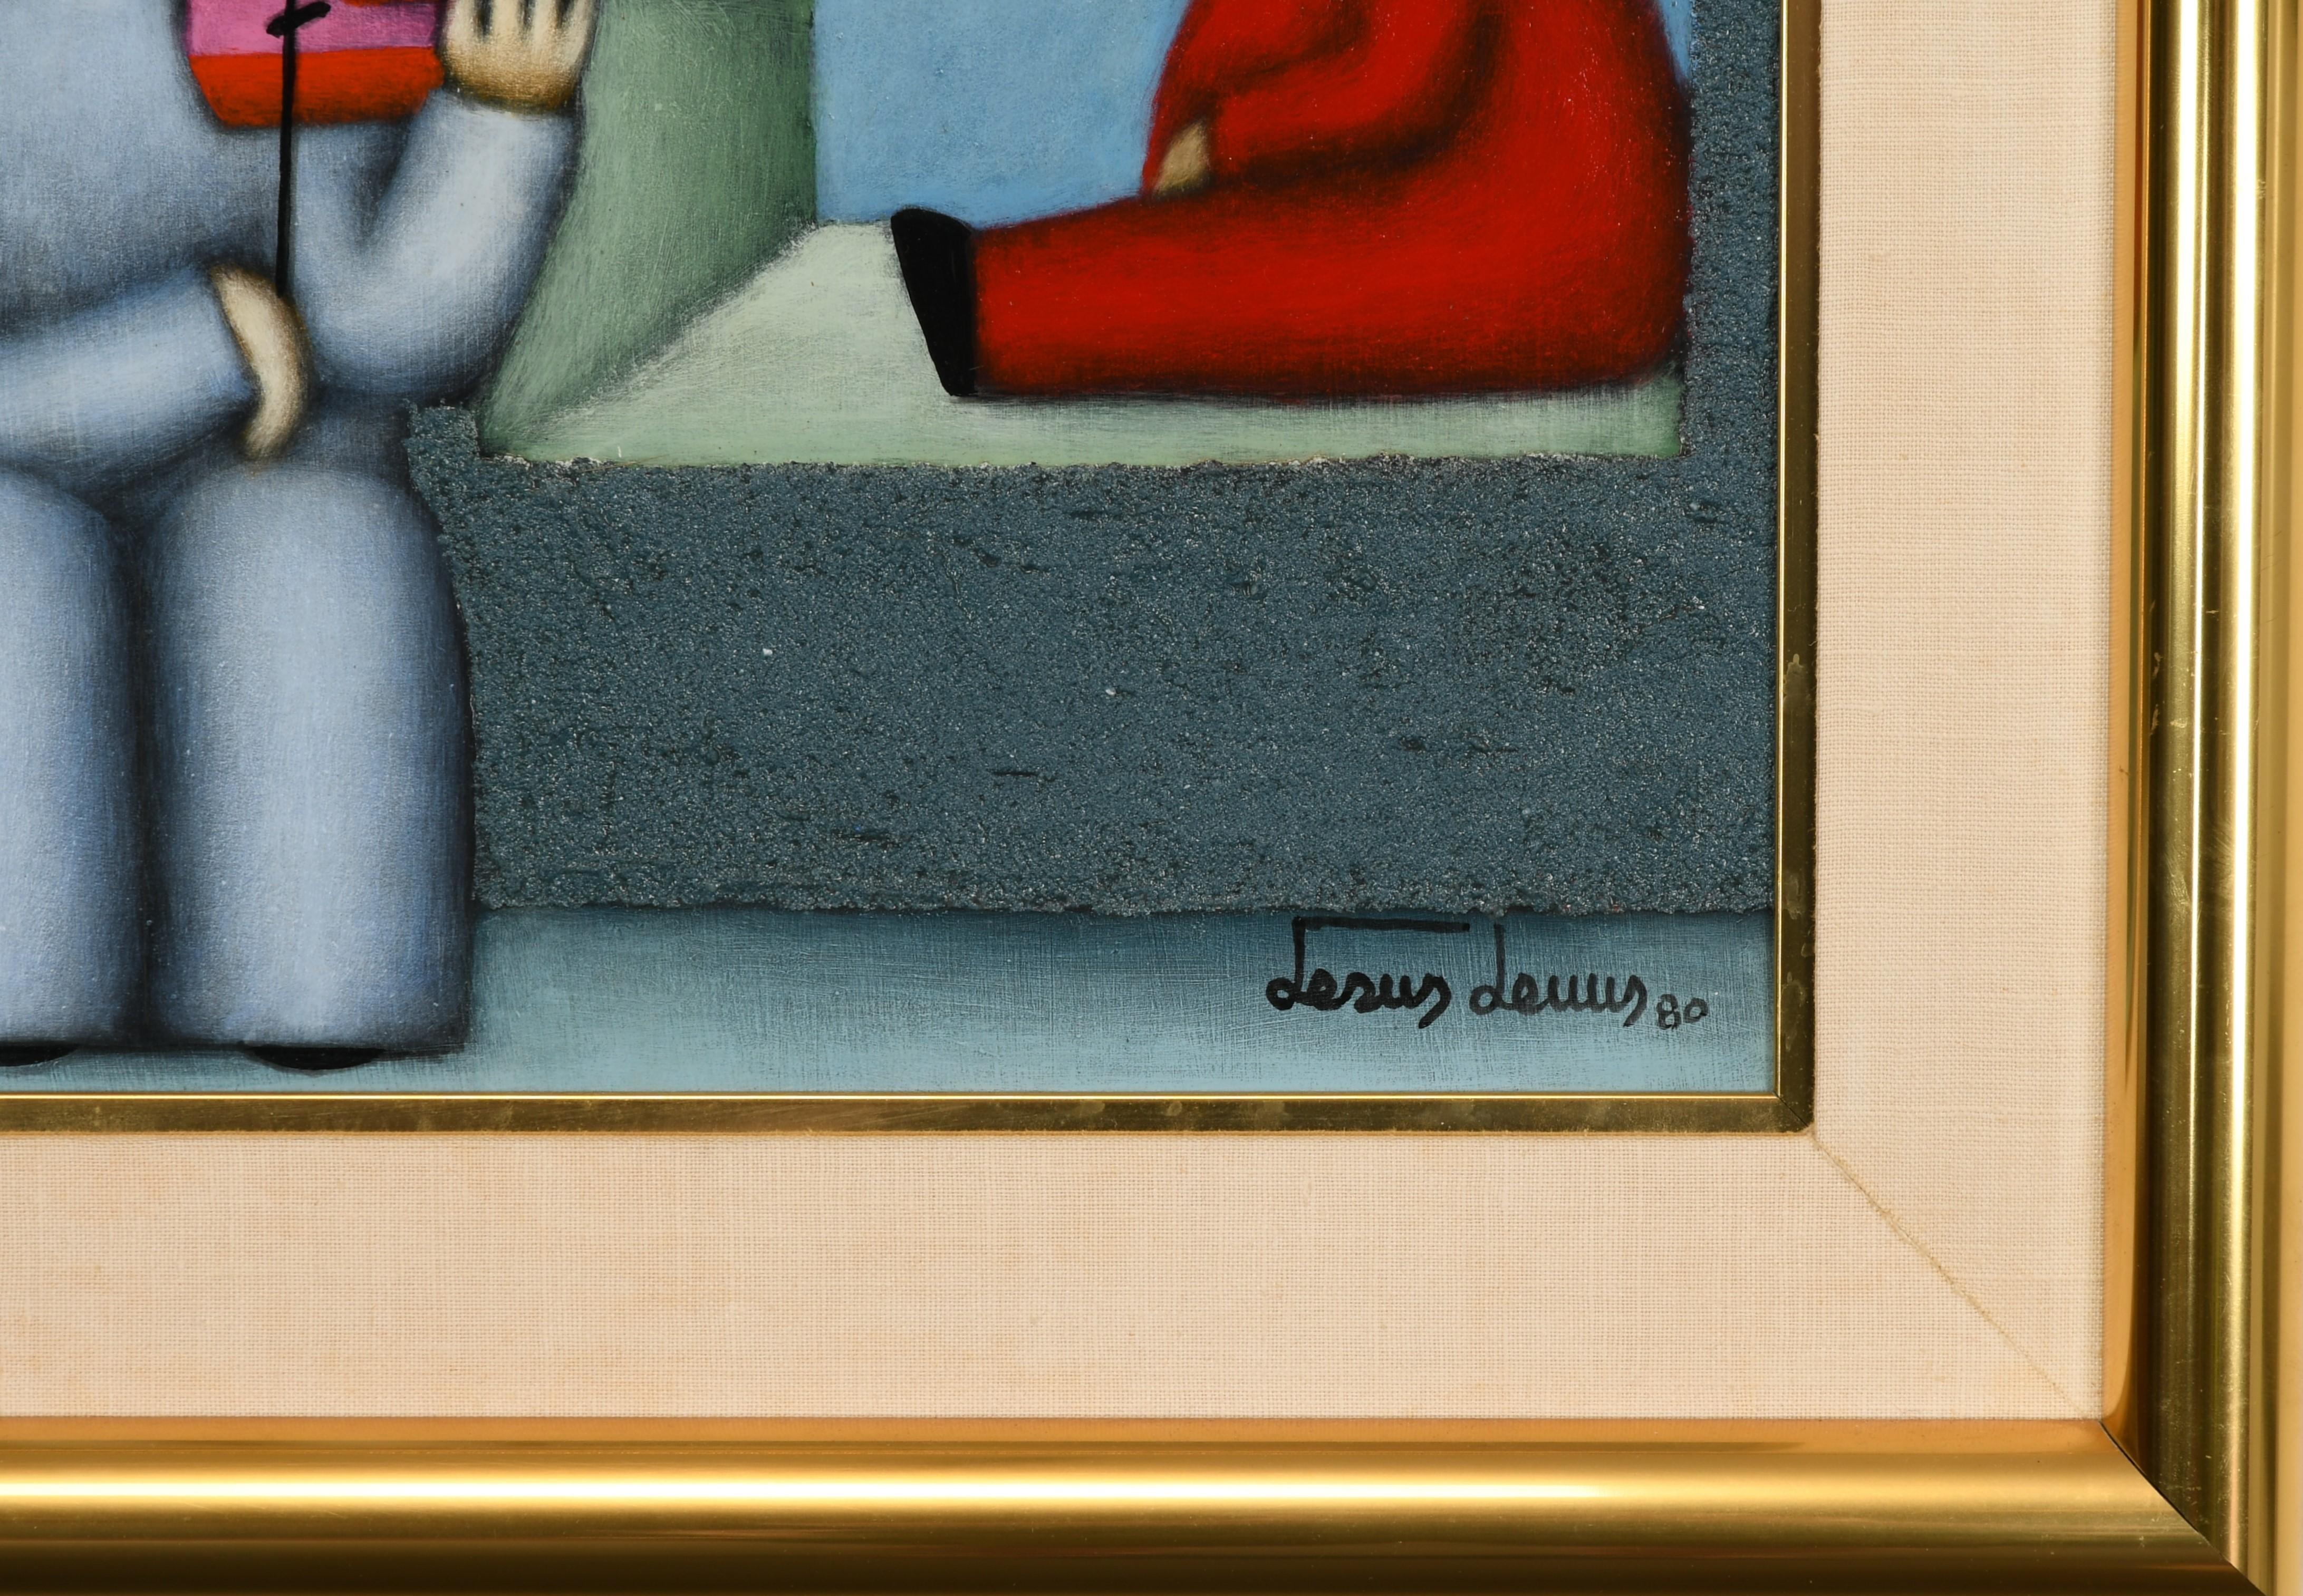 Highly collectible modern painting by Mexican artist Jesus Leuus, 1980. This painting depicts his familiar scenes of family. The giltwood frame is a nice accent with its simple design. Would look great in any modern or contemporary interior. Signed